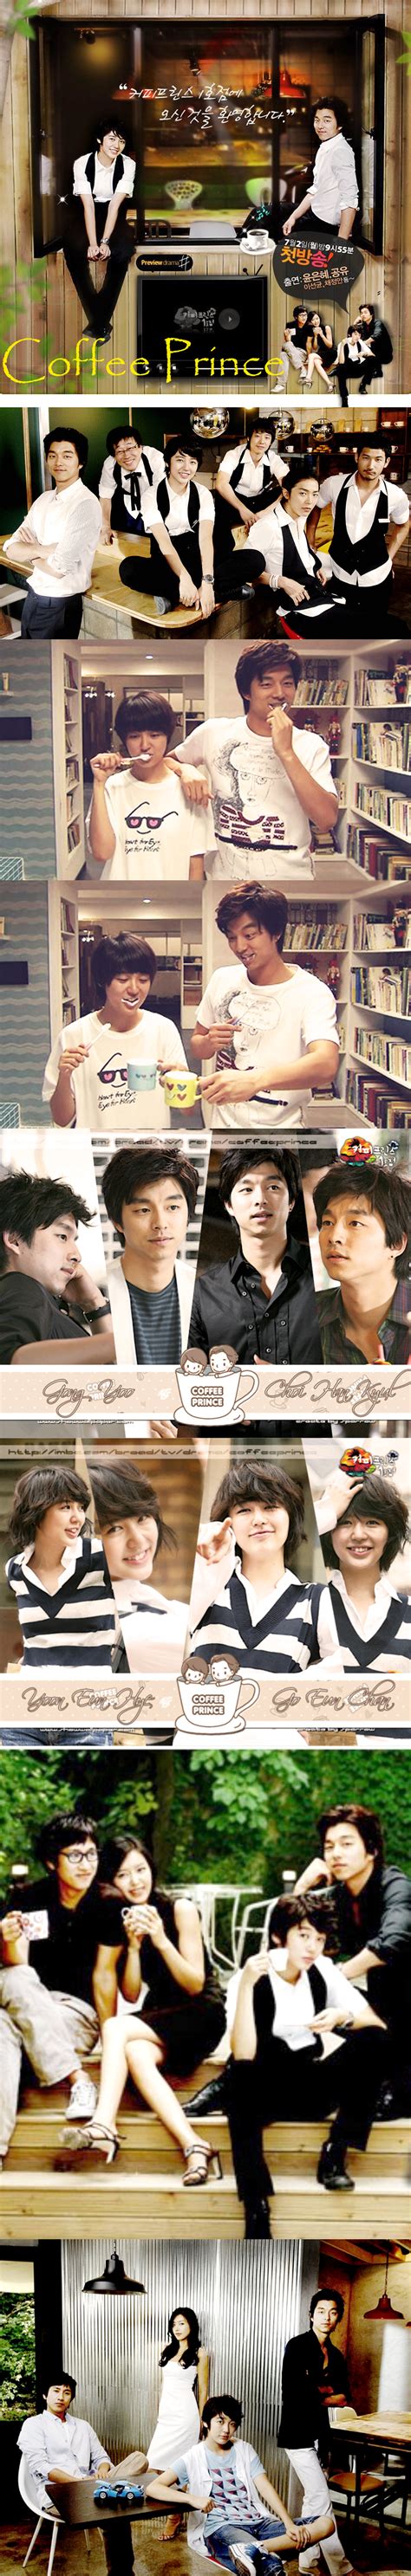 Watch coffee prince episode 17 online. Coffee Prince (The 1st Shop of Coffee Prince) 2007 K Drama ...